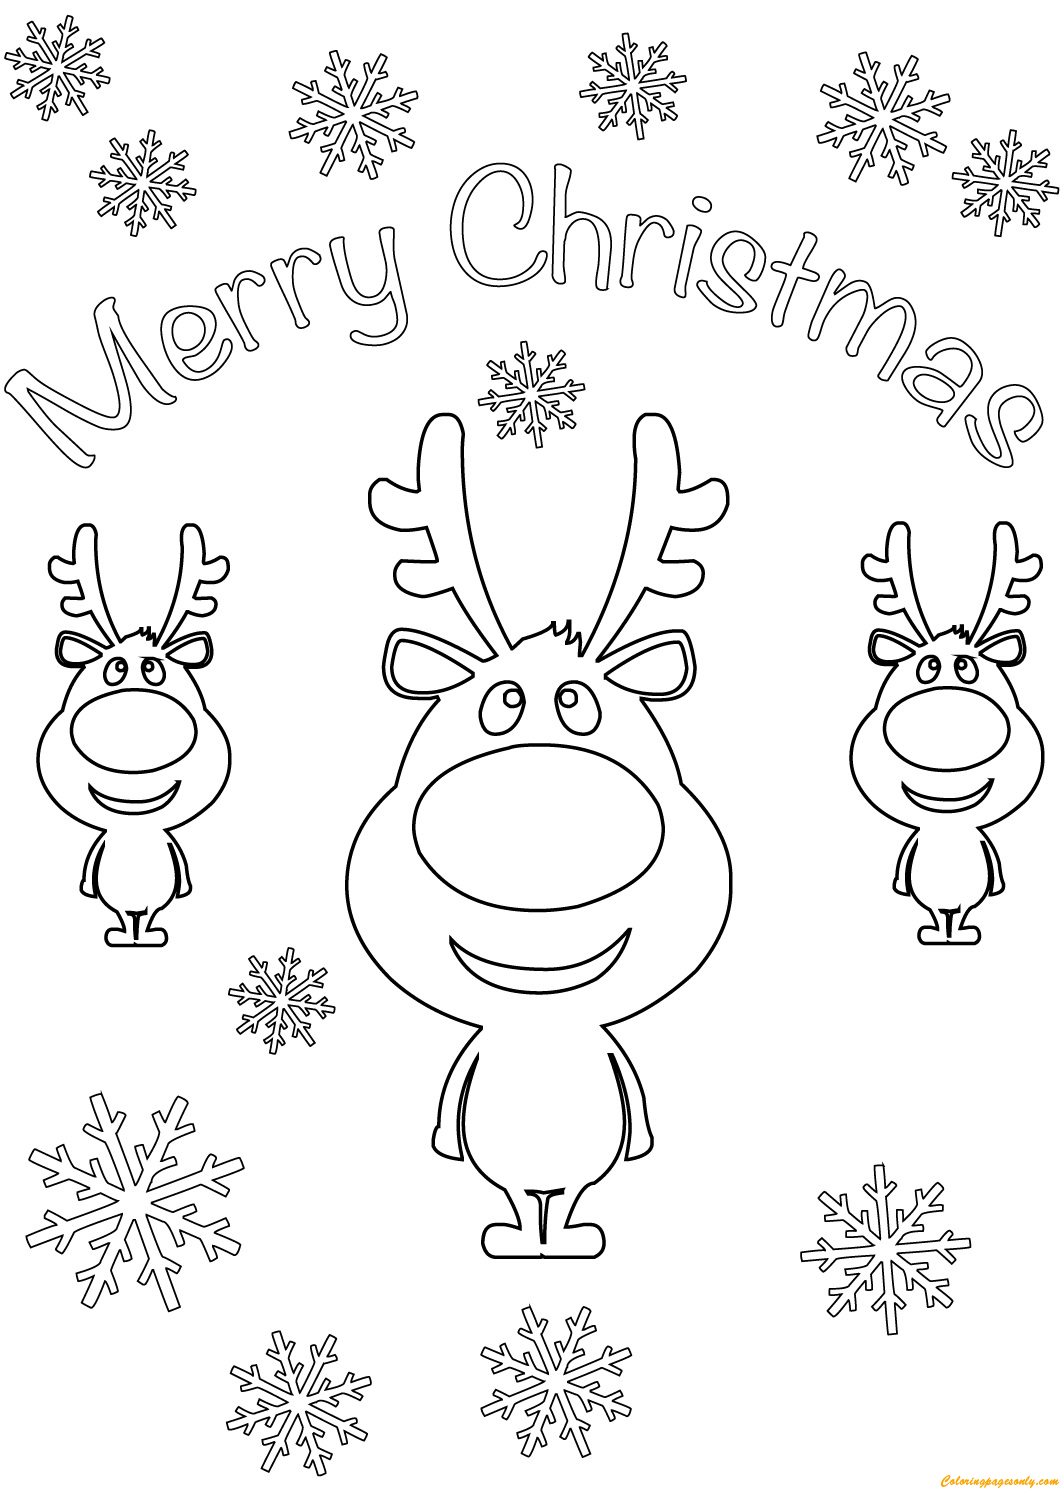 Reindeer Merry Christmas Cards Coloring Pages Christmas Coloring 